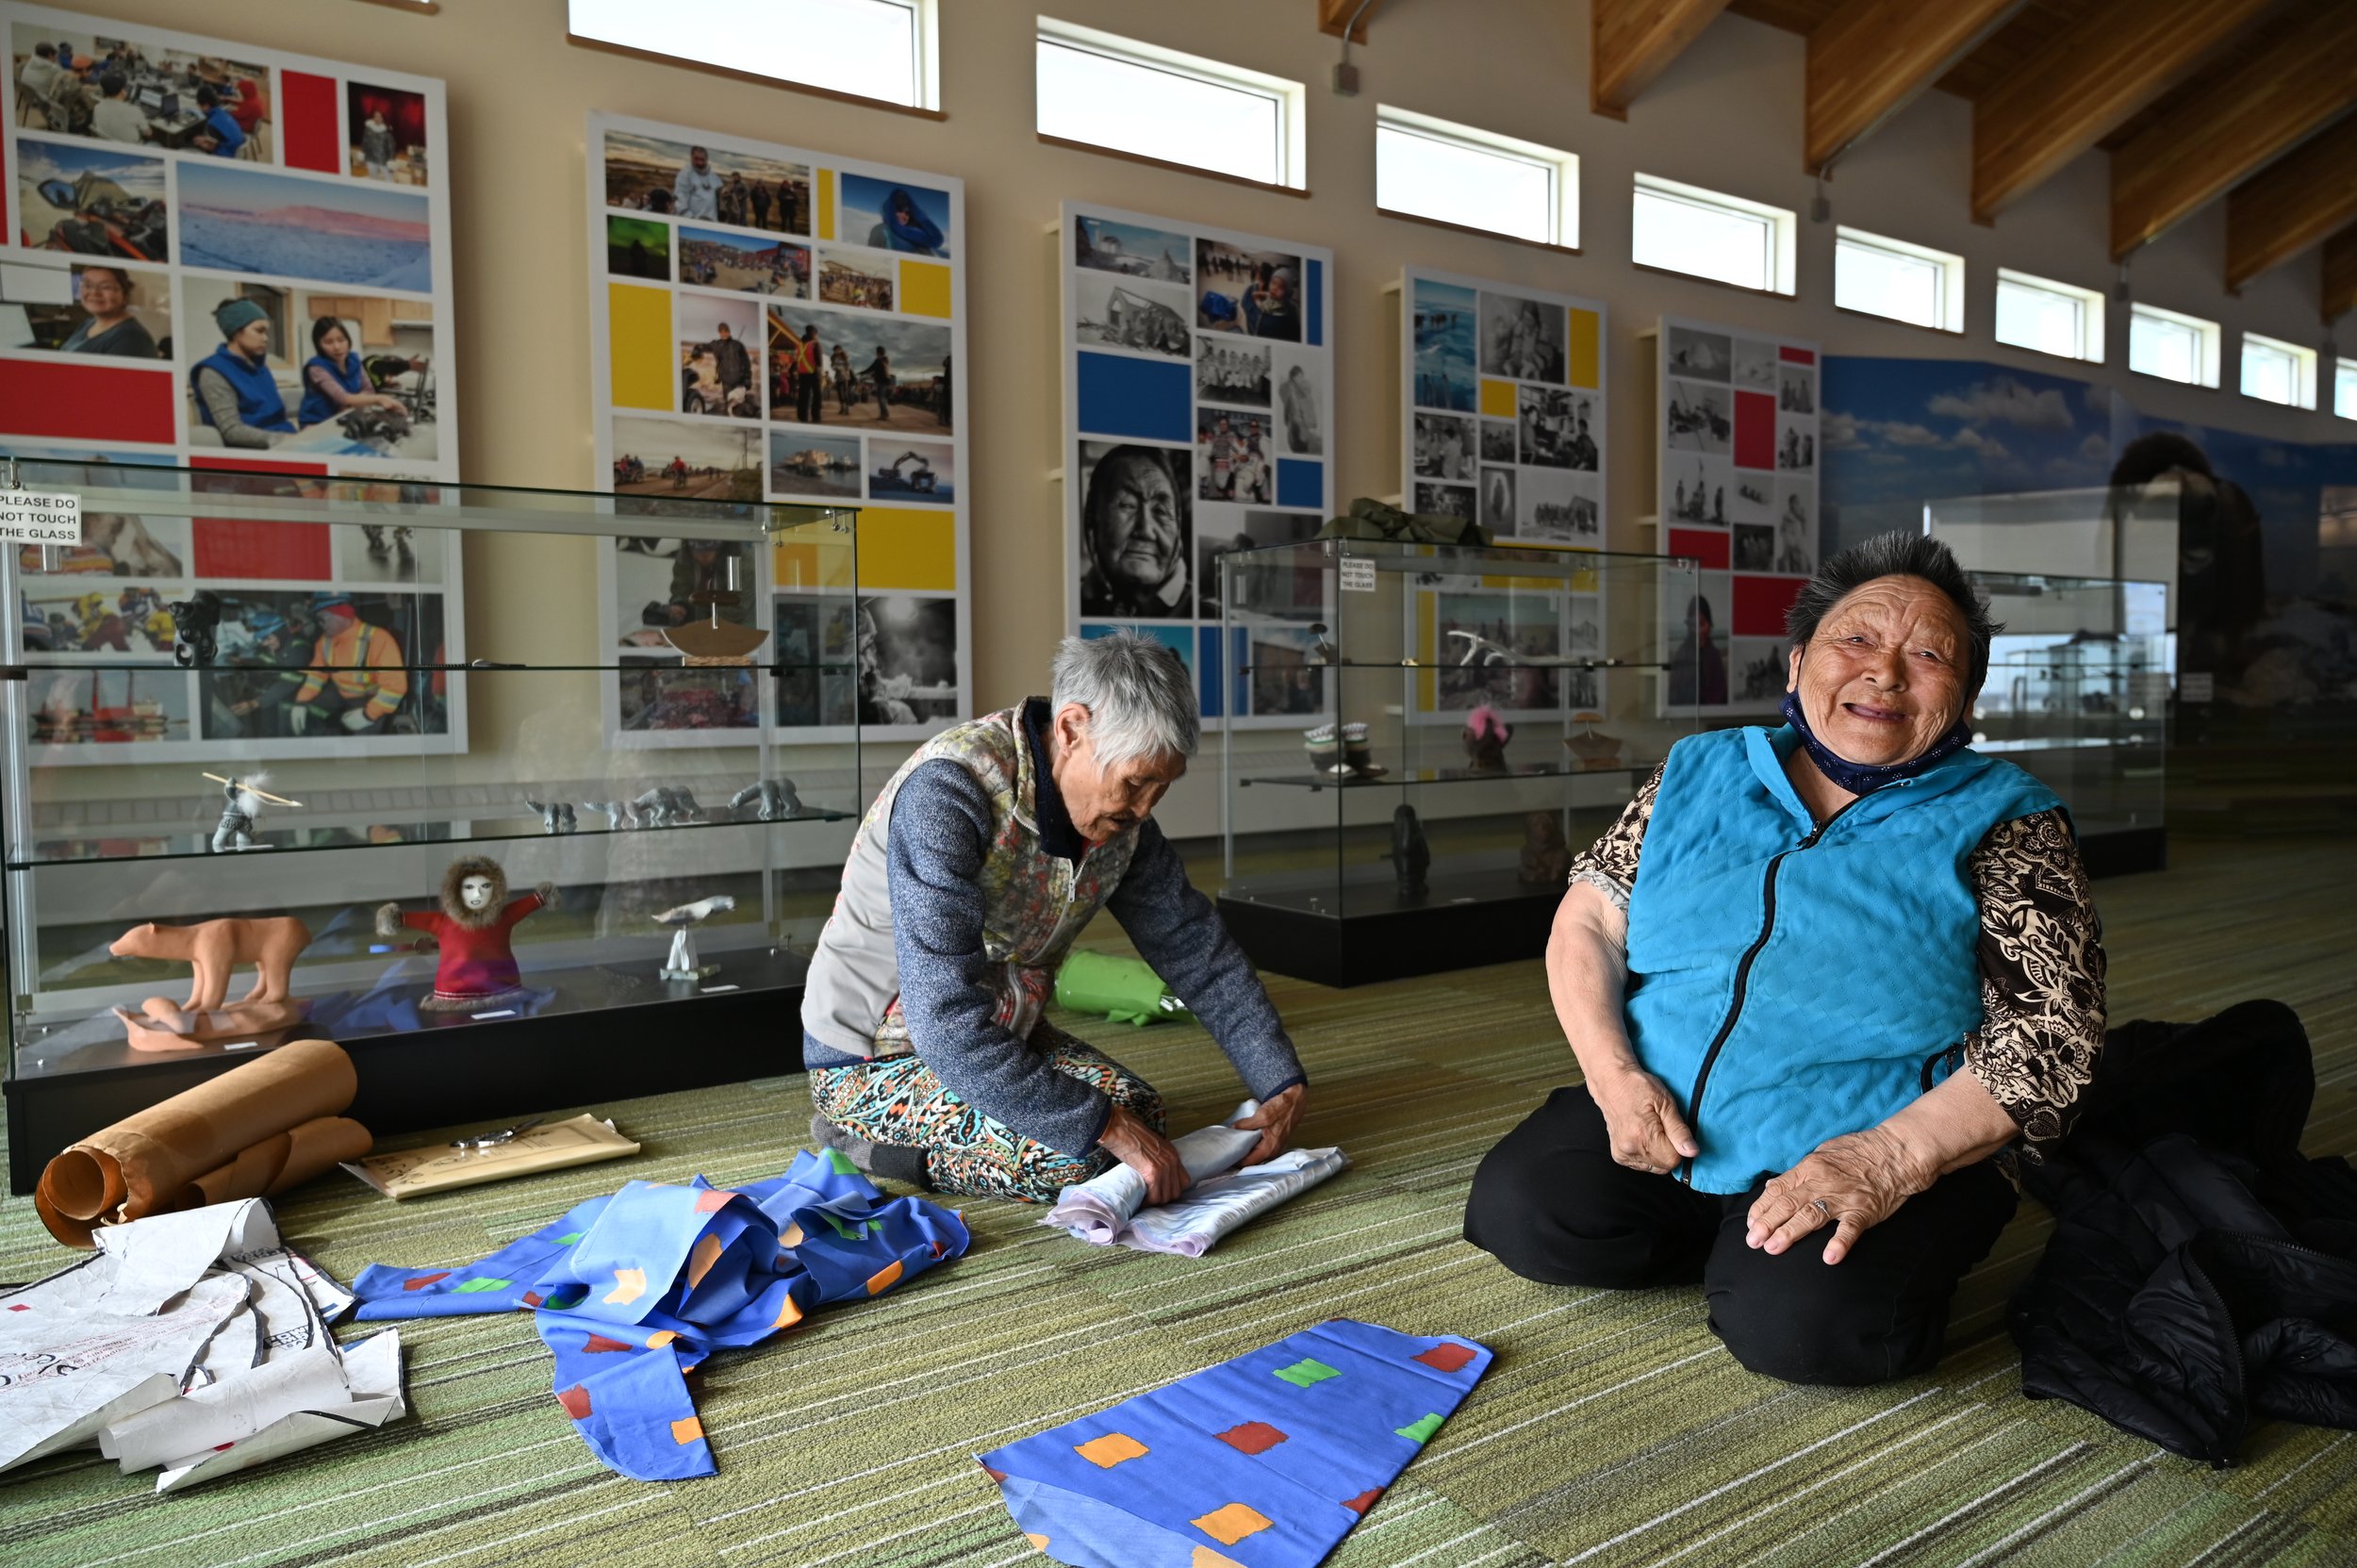  Inside the Kivalliq Regional Visitor Centre in Rankin Inlet. Helen Iguptak (left) workshop instructor and Elder, explains the components of the  tuili  (the garment used by women as parkas and to carry babies on our backs) to our oldest student, Mon